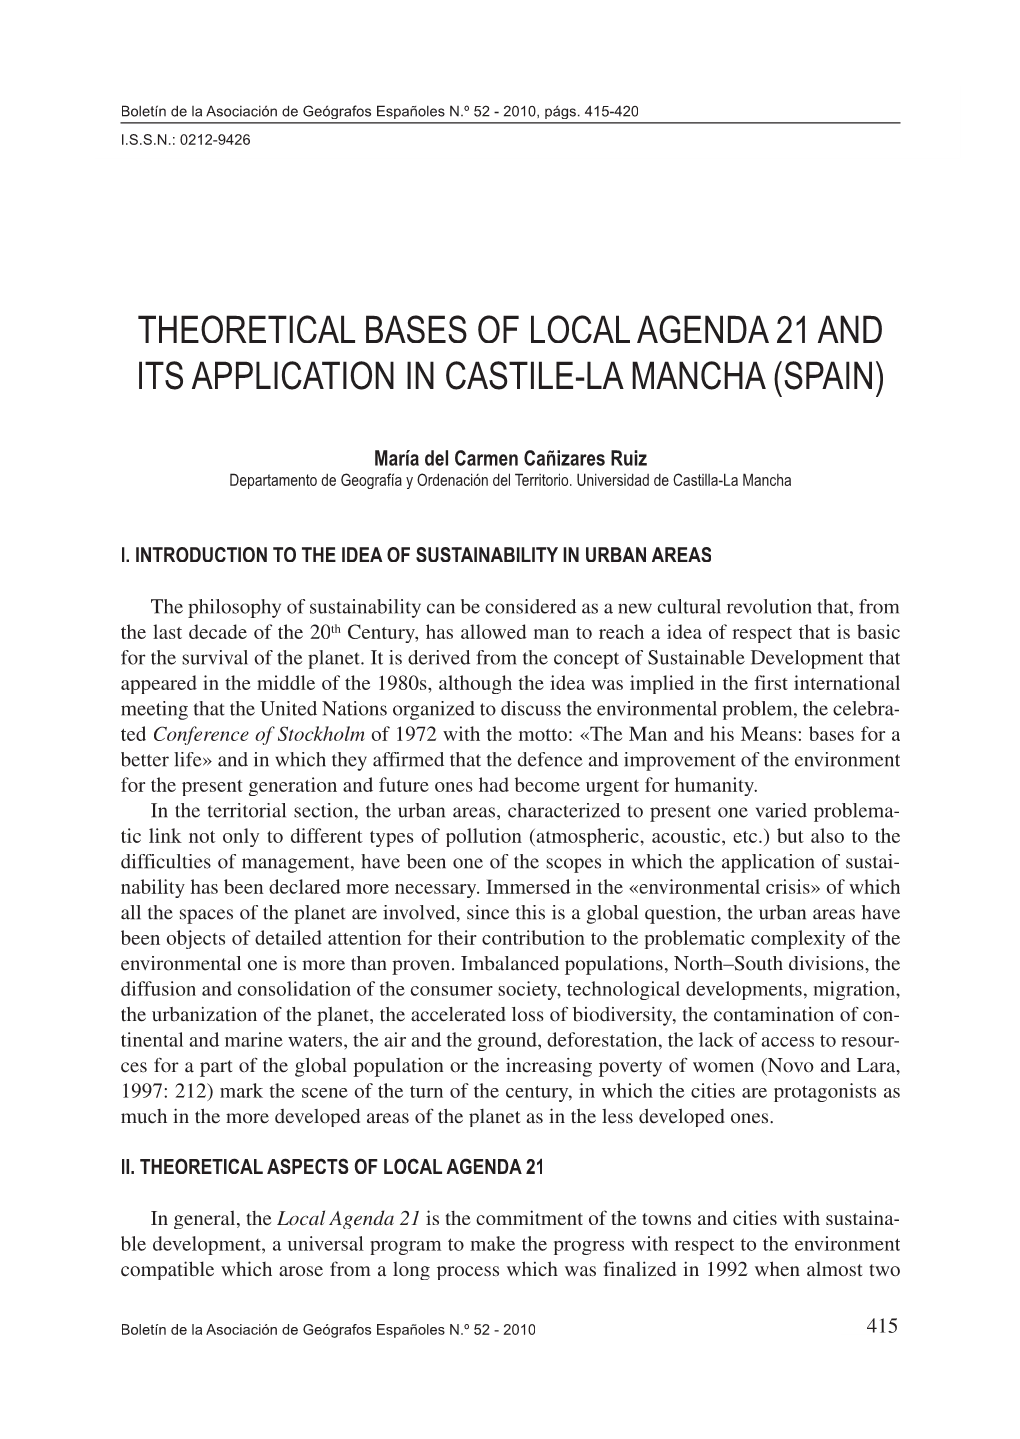 Theoretical Bases of Local Agenda 21 and Its Application in Castile-La Mancha (Spain)